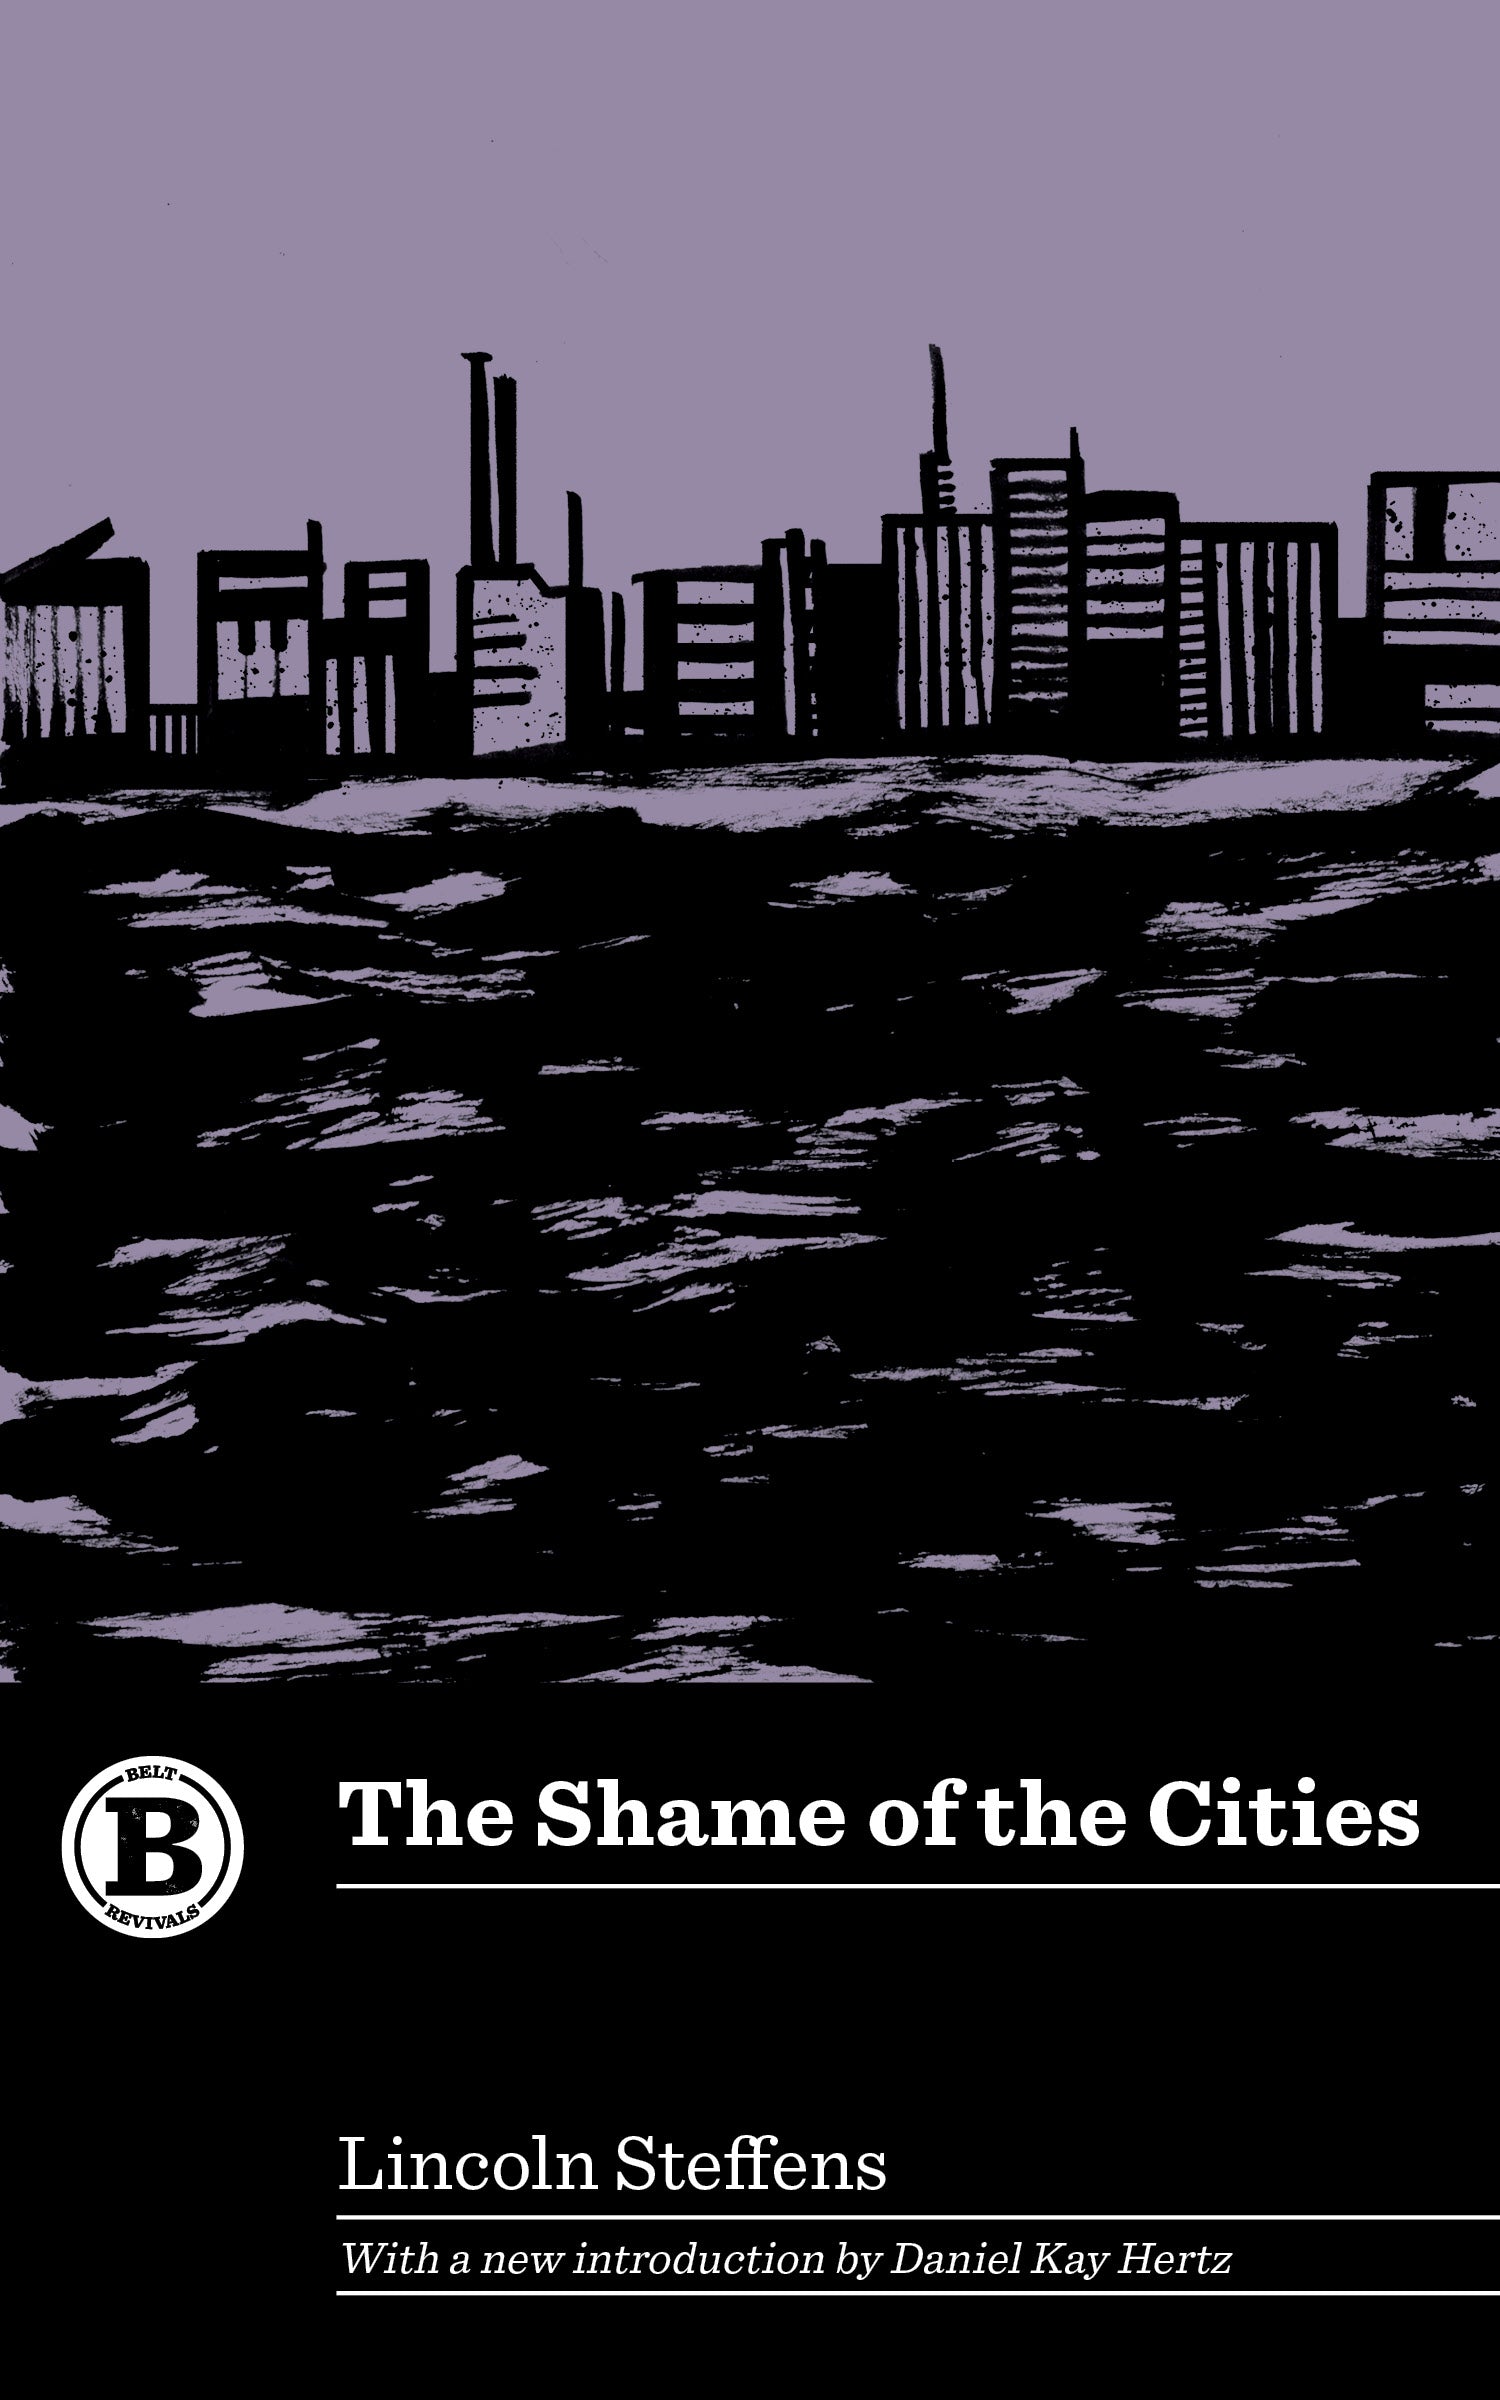 The Shame of the Cities by Lincoln Steffens - Belt Publishing